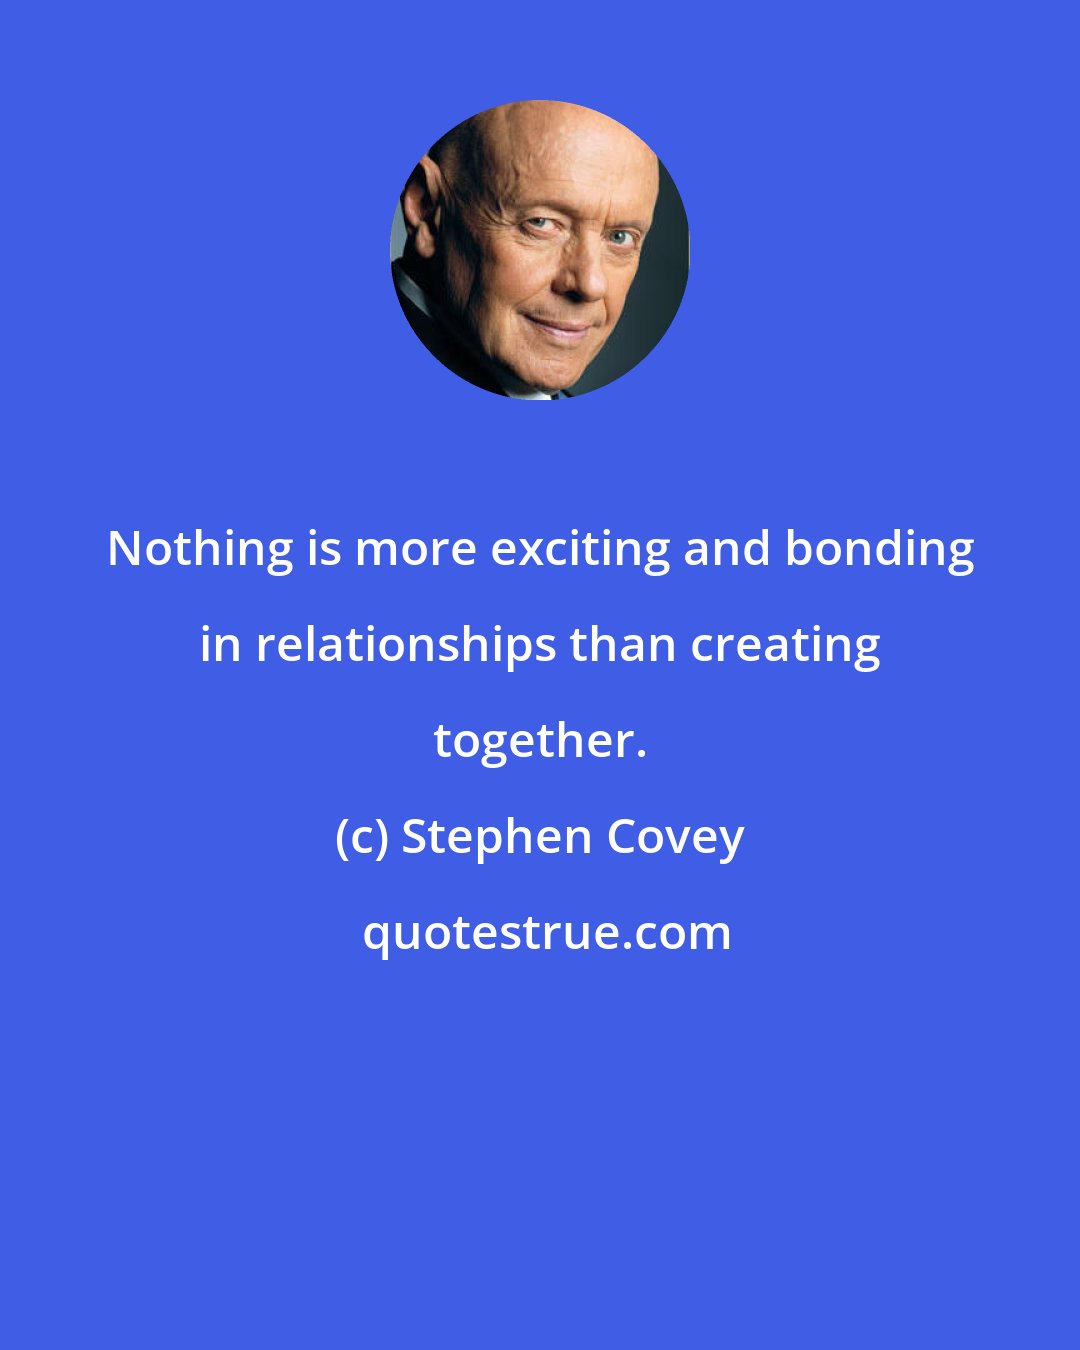 Stephen Covey: Nothing is more exciting and bonding in relationships than creating together.